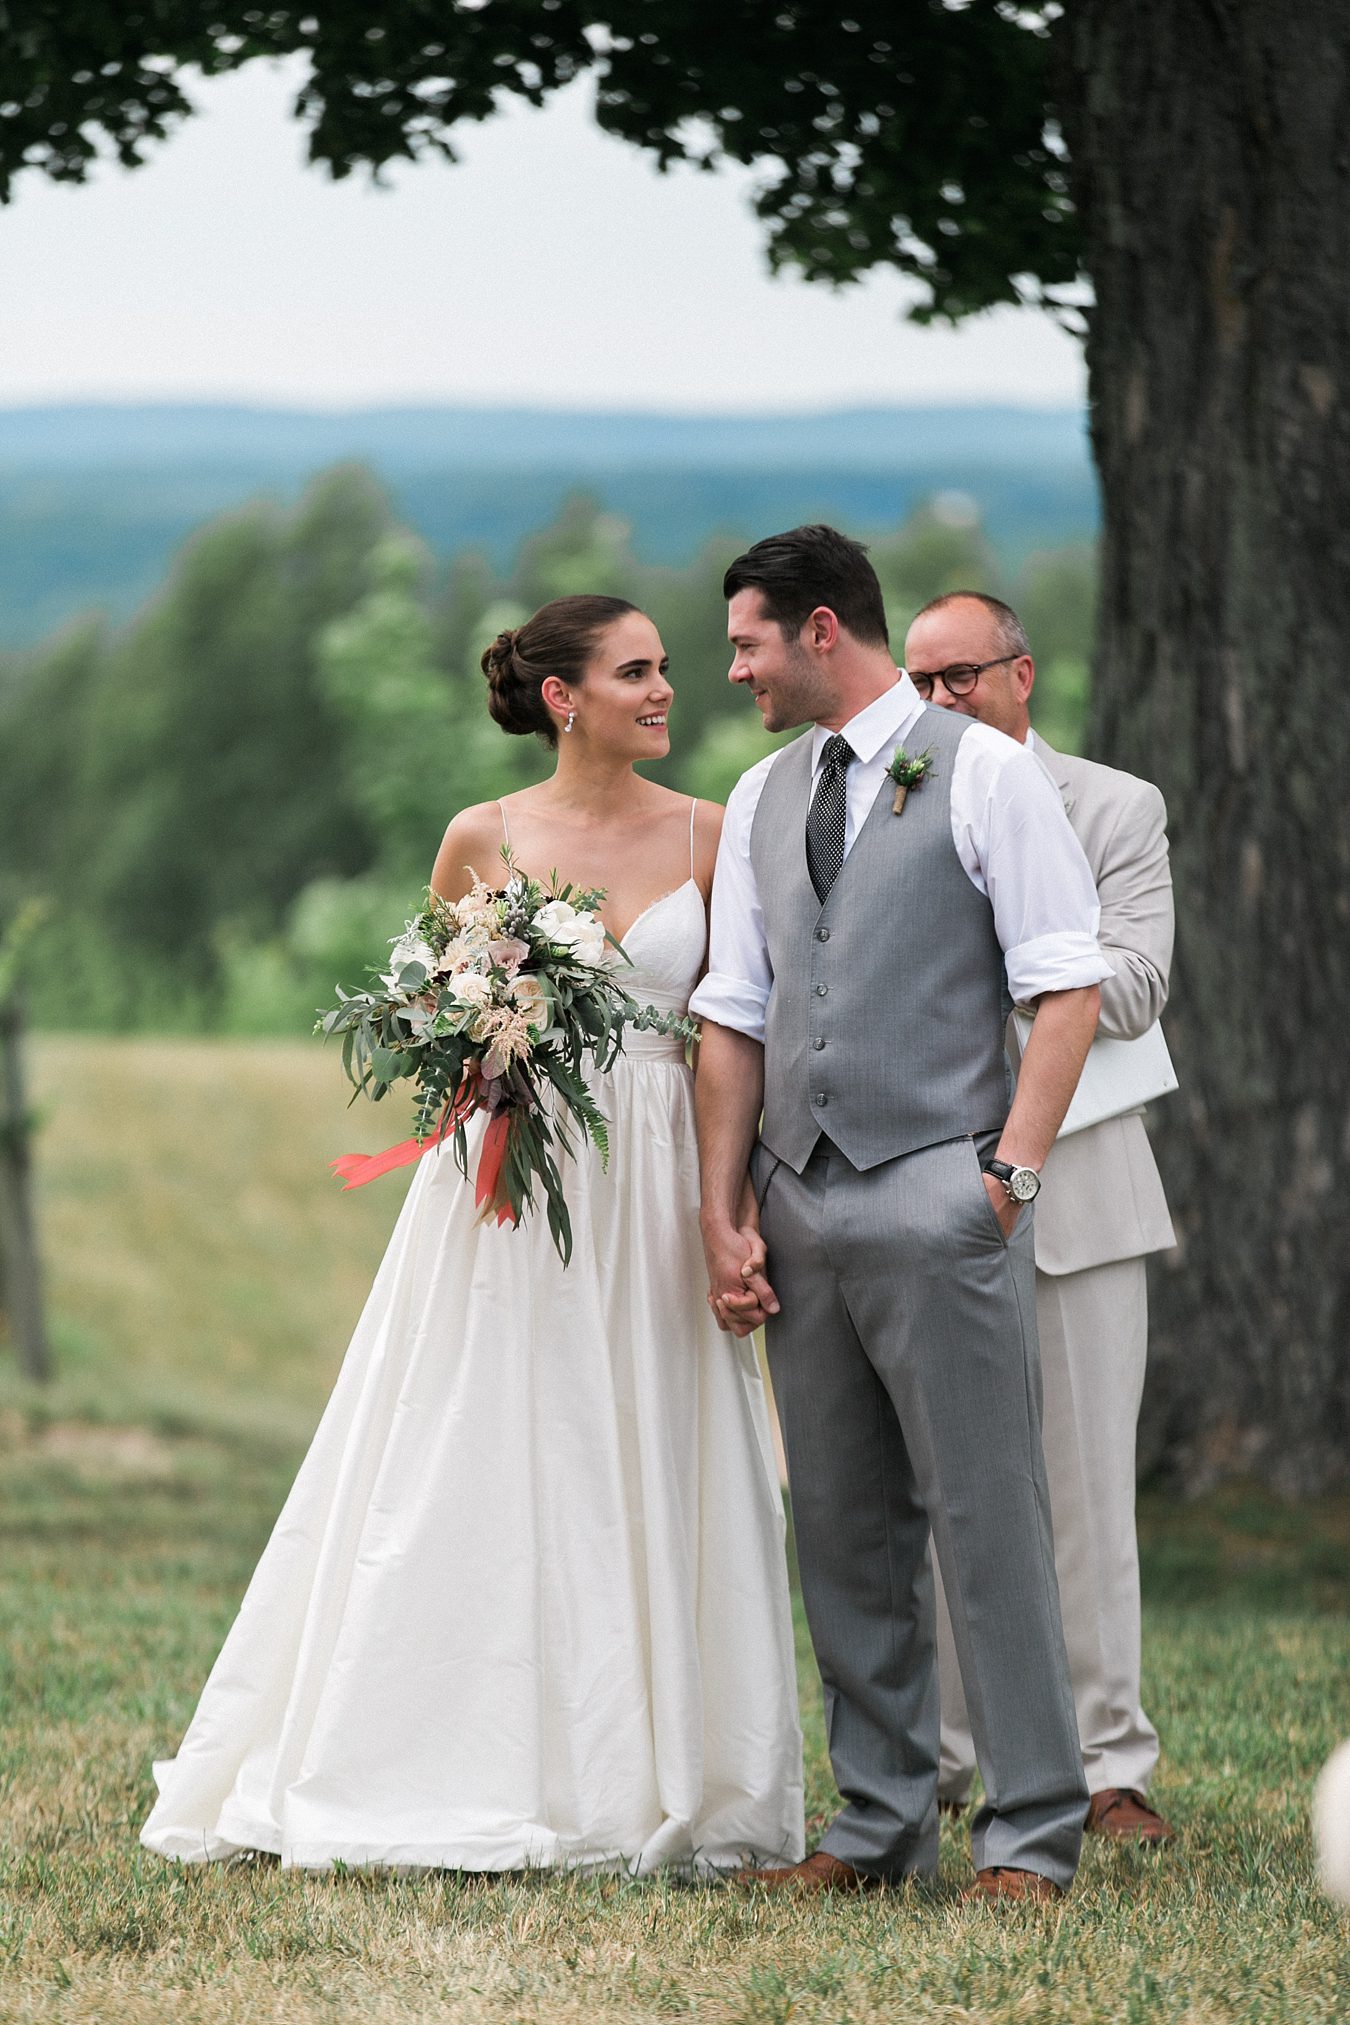 Traverse City Mi Wedding Photography | Cory Weber Photography | Sincerely, Ginger Event Design & Production